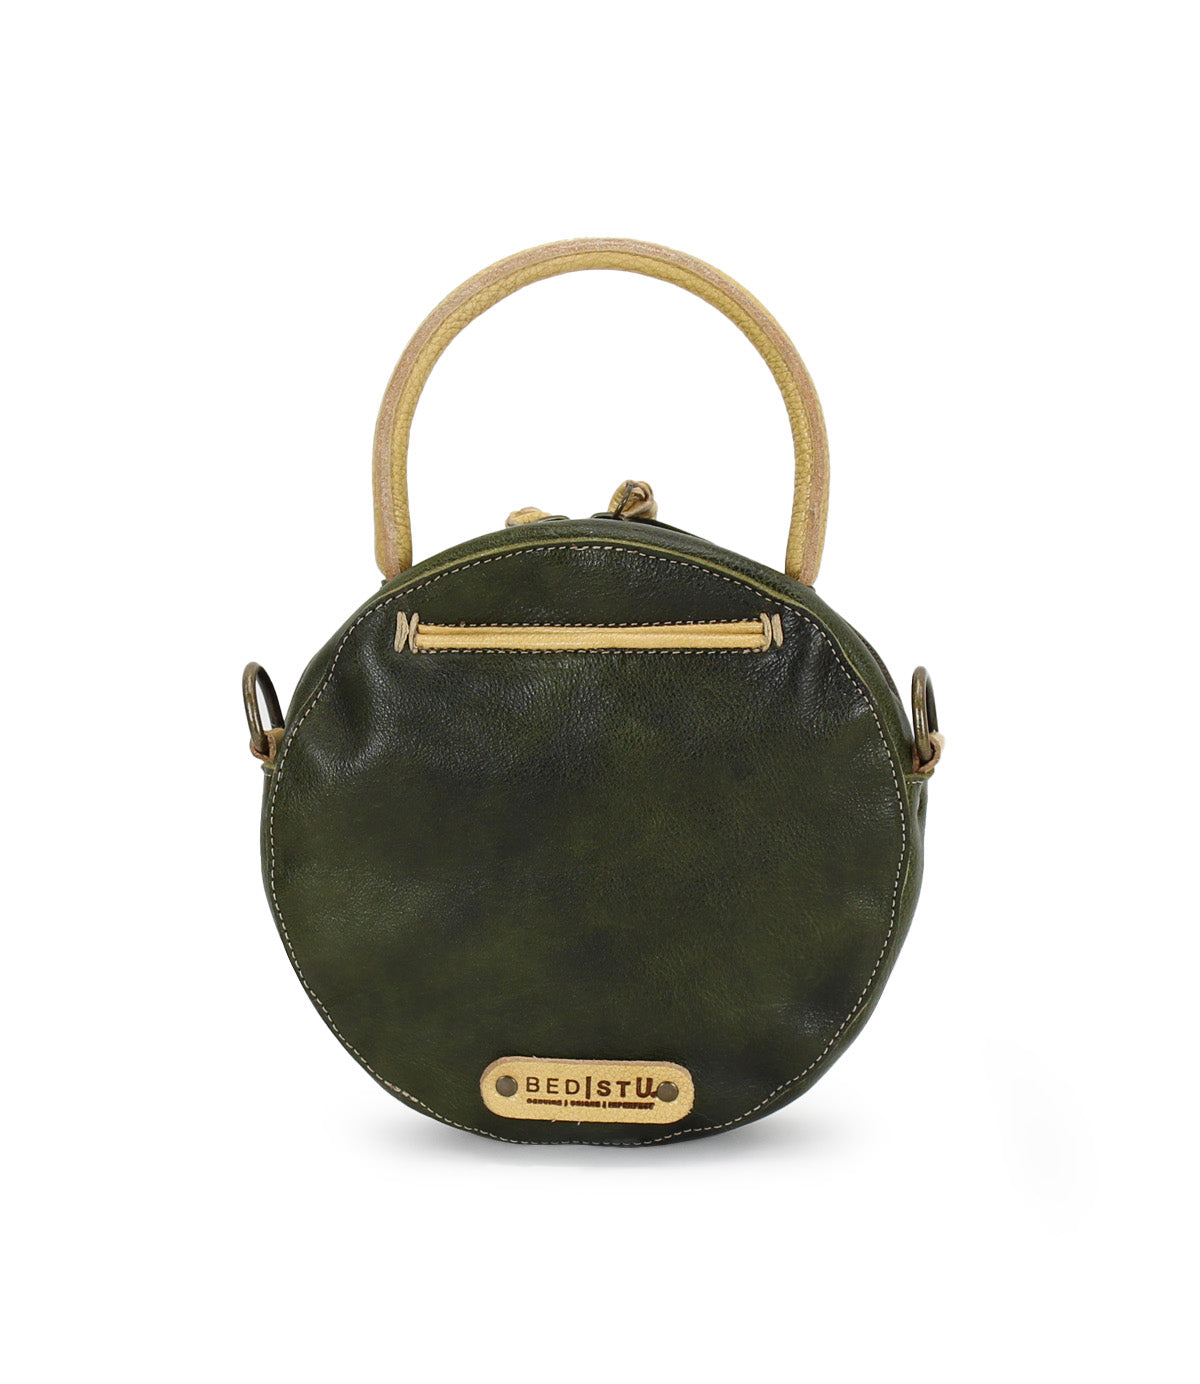 A Bed Stu Arenfield green leather handbag with a gold handle.